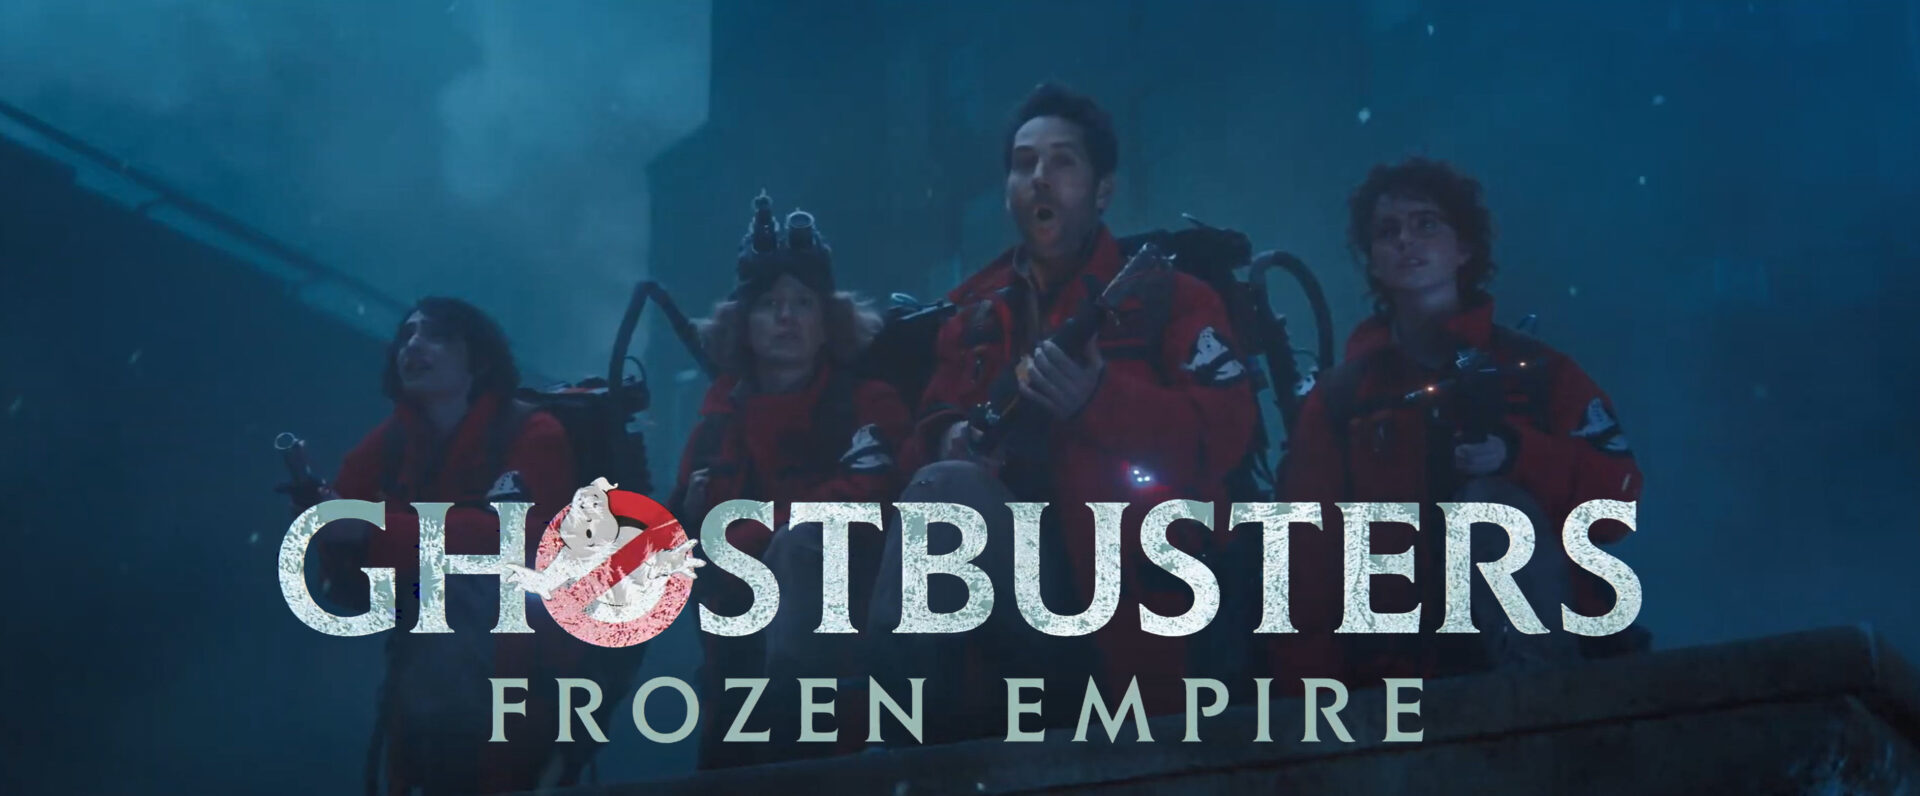 Ghostbusters: Frozen Empire Trailer Takes The Franchise Back To A Chilly NYC